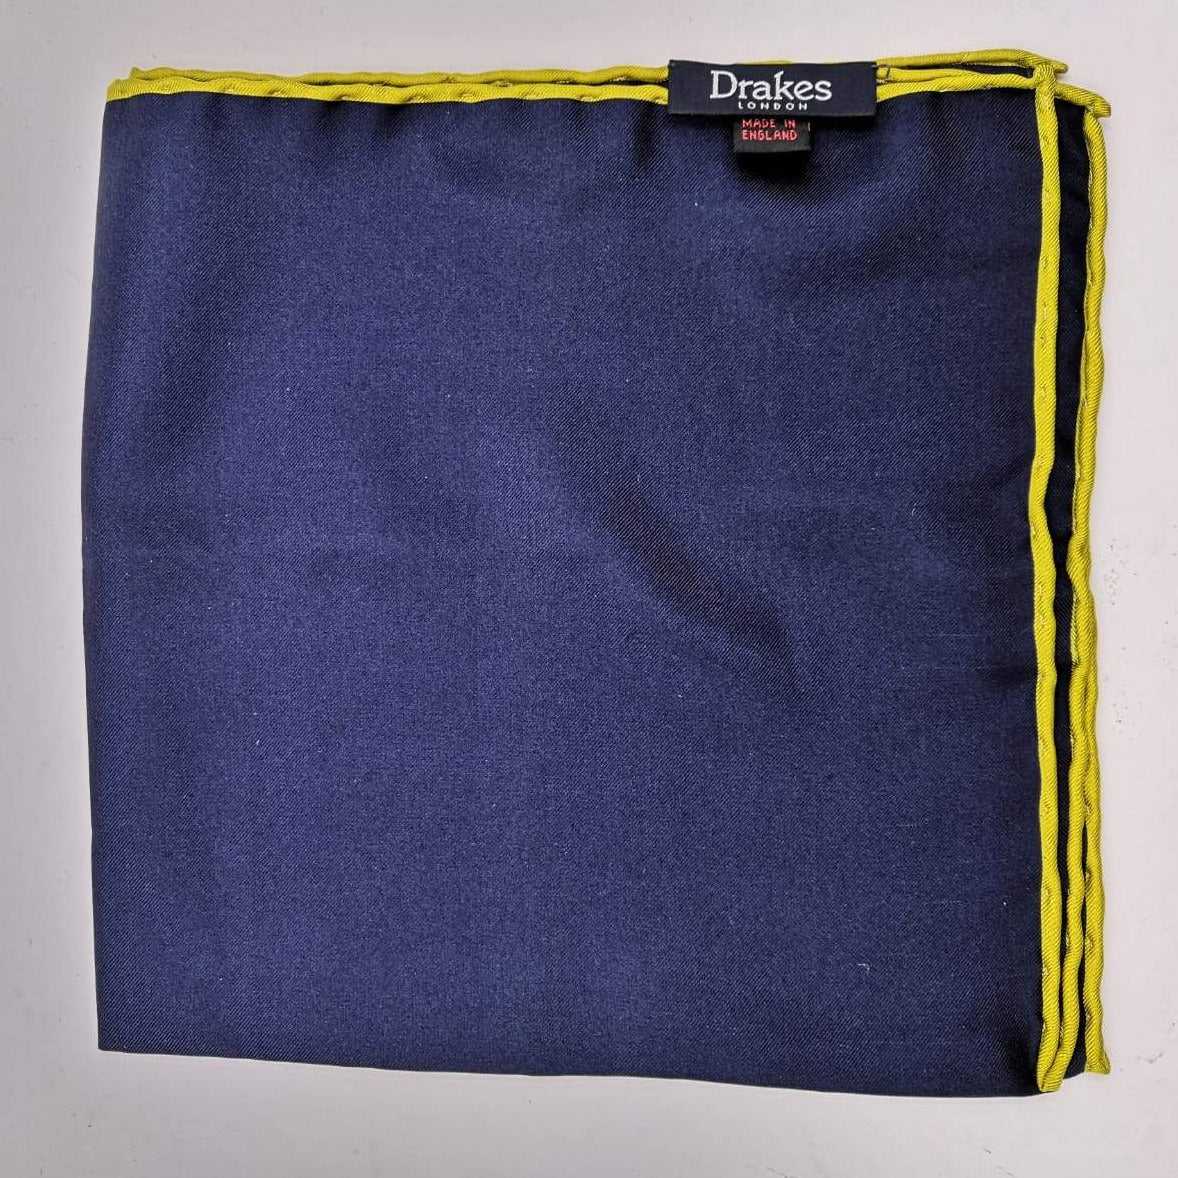 Drake's 100%Silk Hand-rolled Blue and Yellow -  Pocket Square Handmade in Italy 41 cm X 41cm #0520